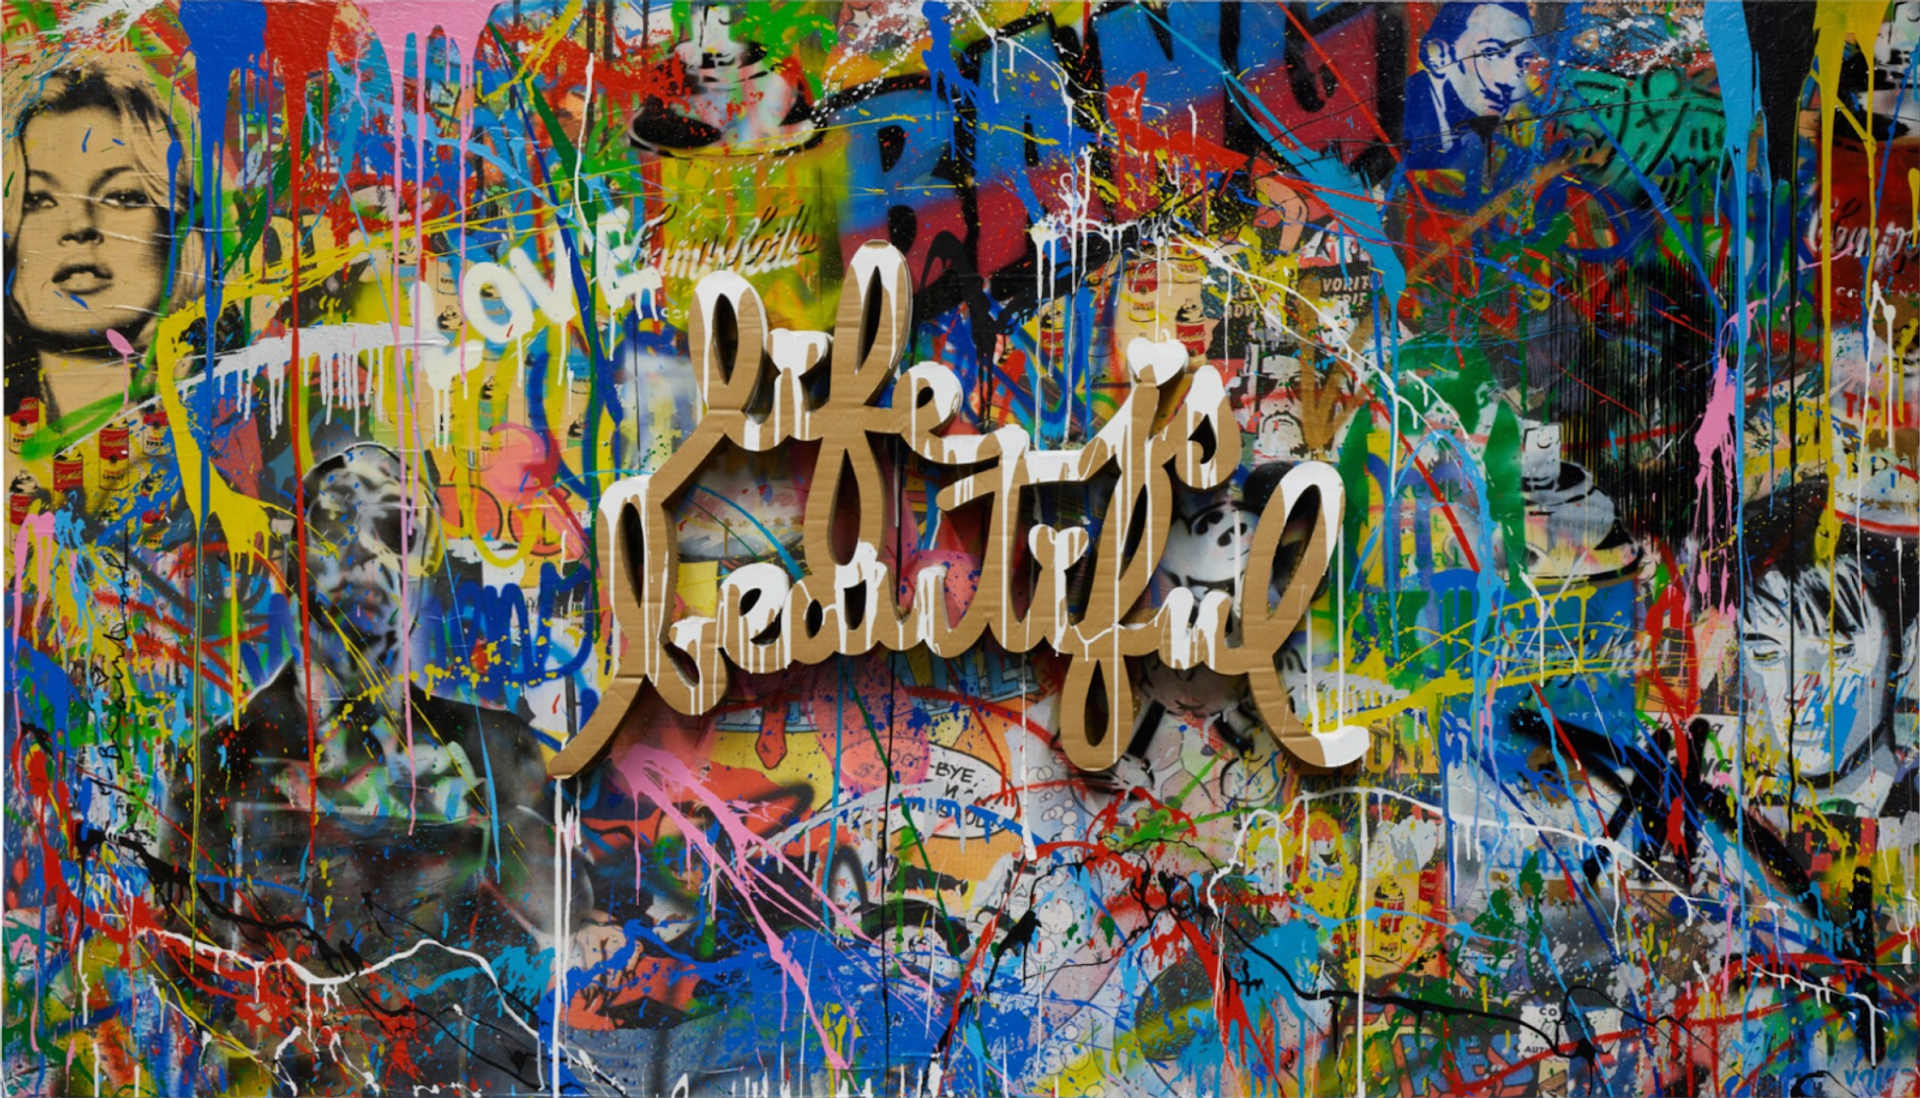 An image of the painting Life Is Beautiful by Mr. Brainwash, featuring a cursive script of the title in black, against a colourful spray painted background featuring Warhol’s Campbell’s Soups.